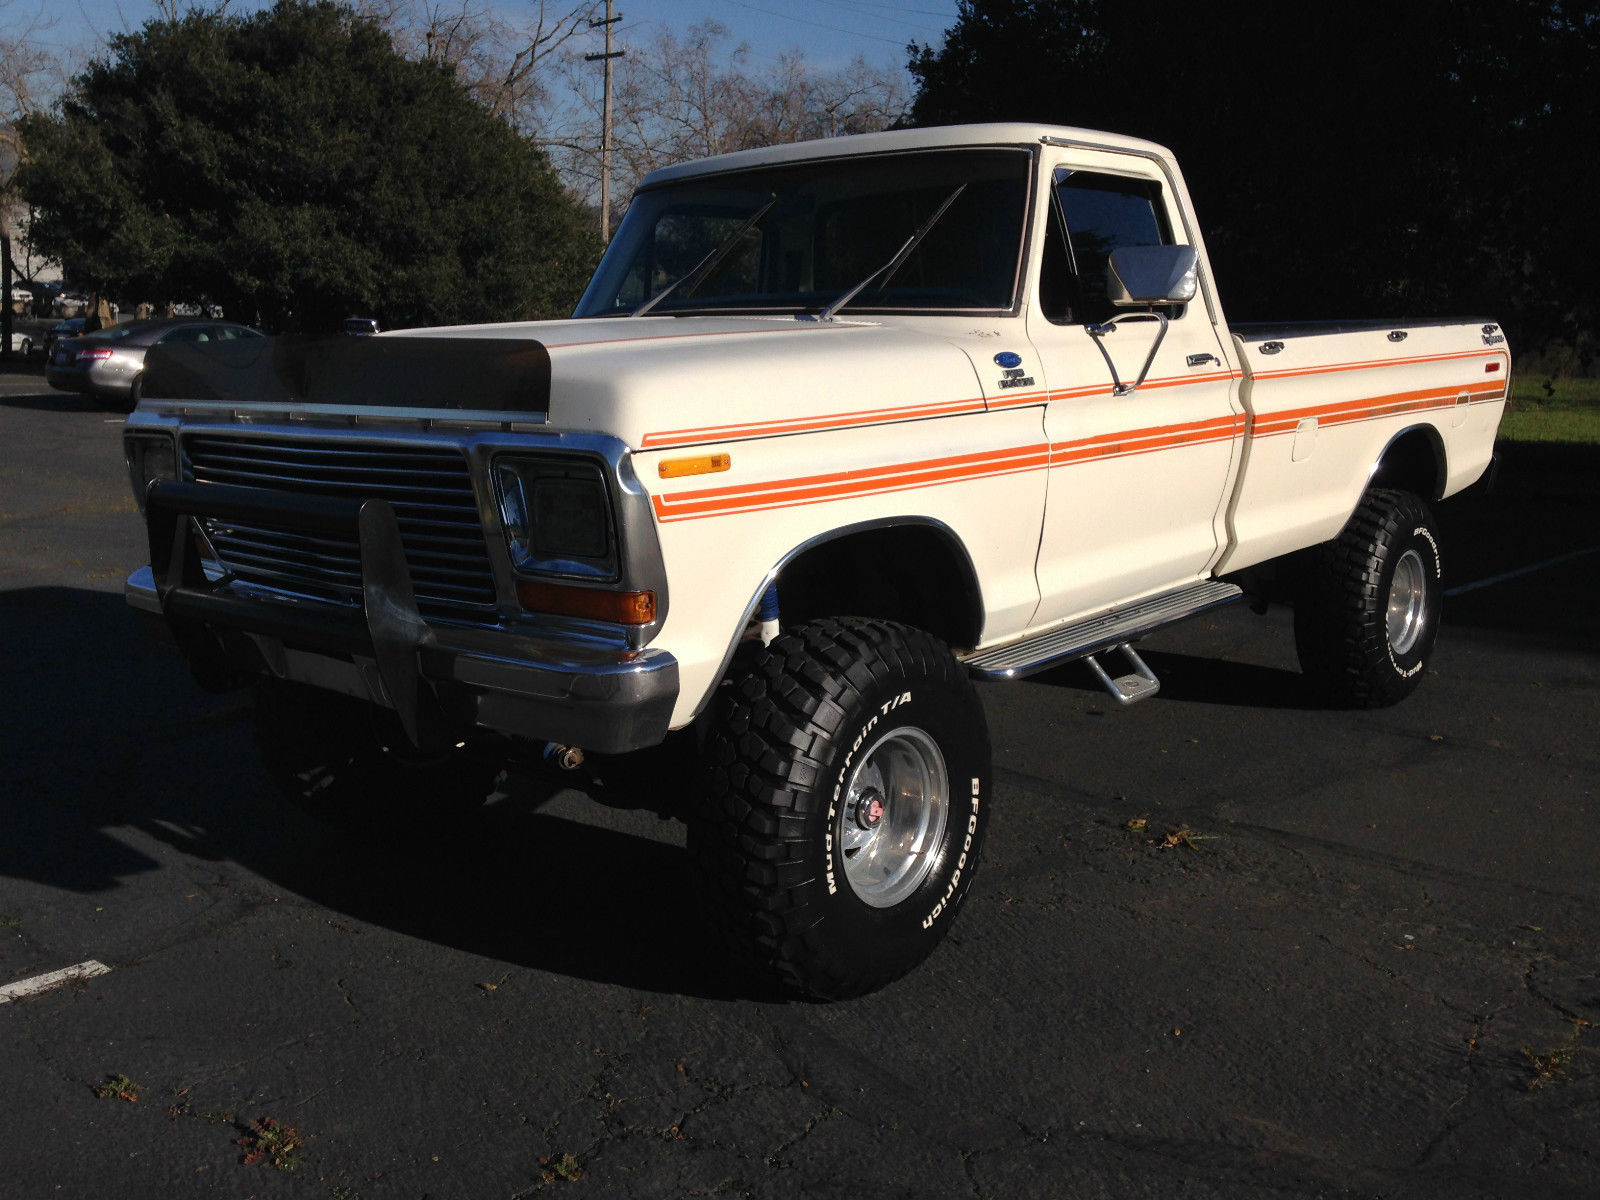 1979 Ford F 150 4x4 Explorer Lifted Longbed Pickup Very Nice